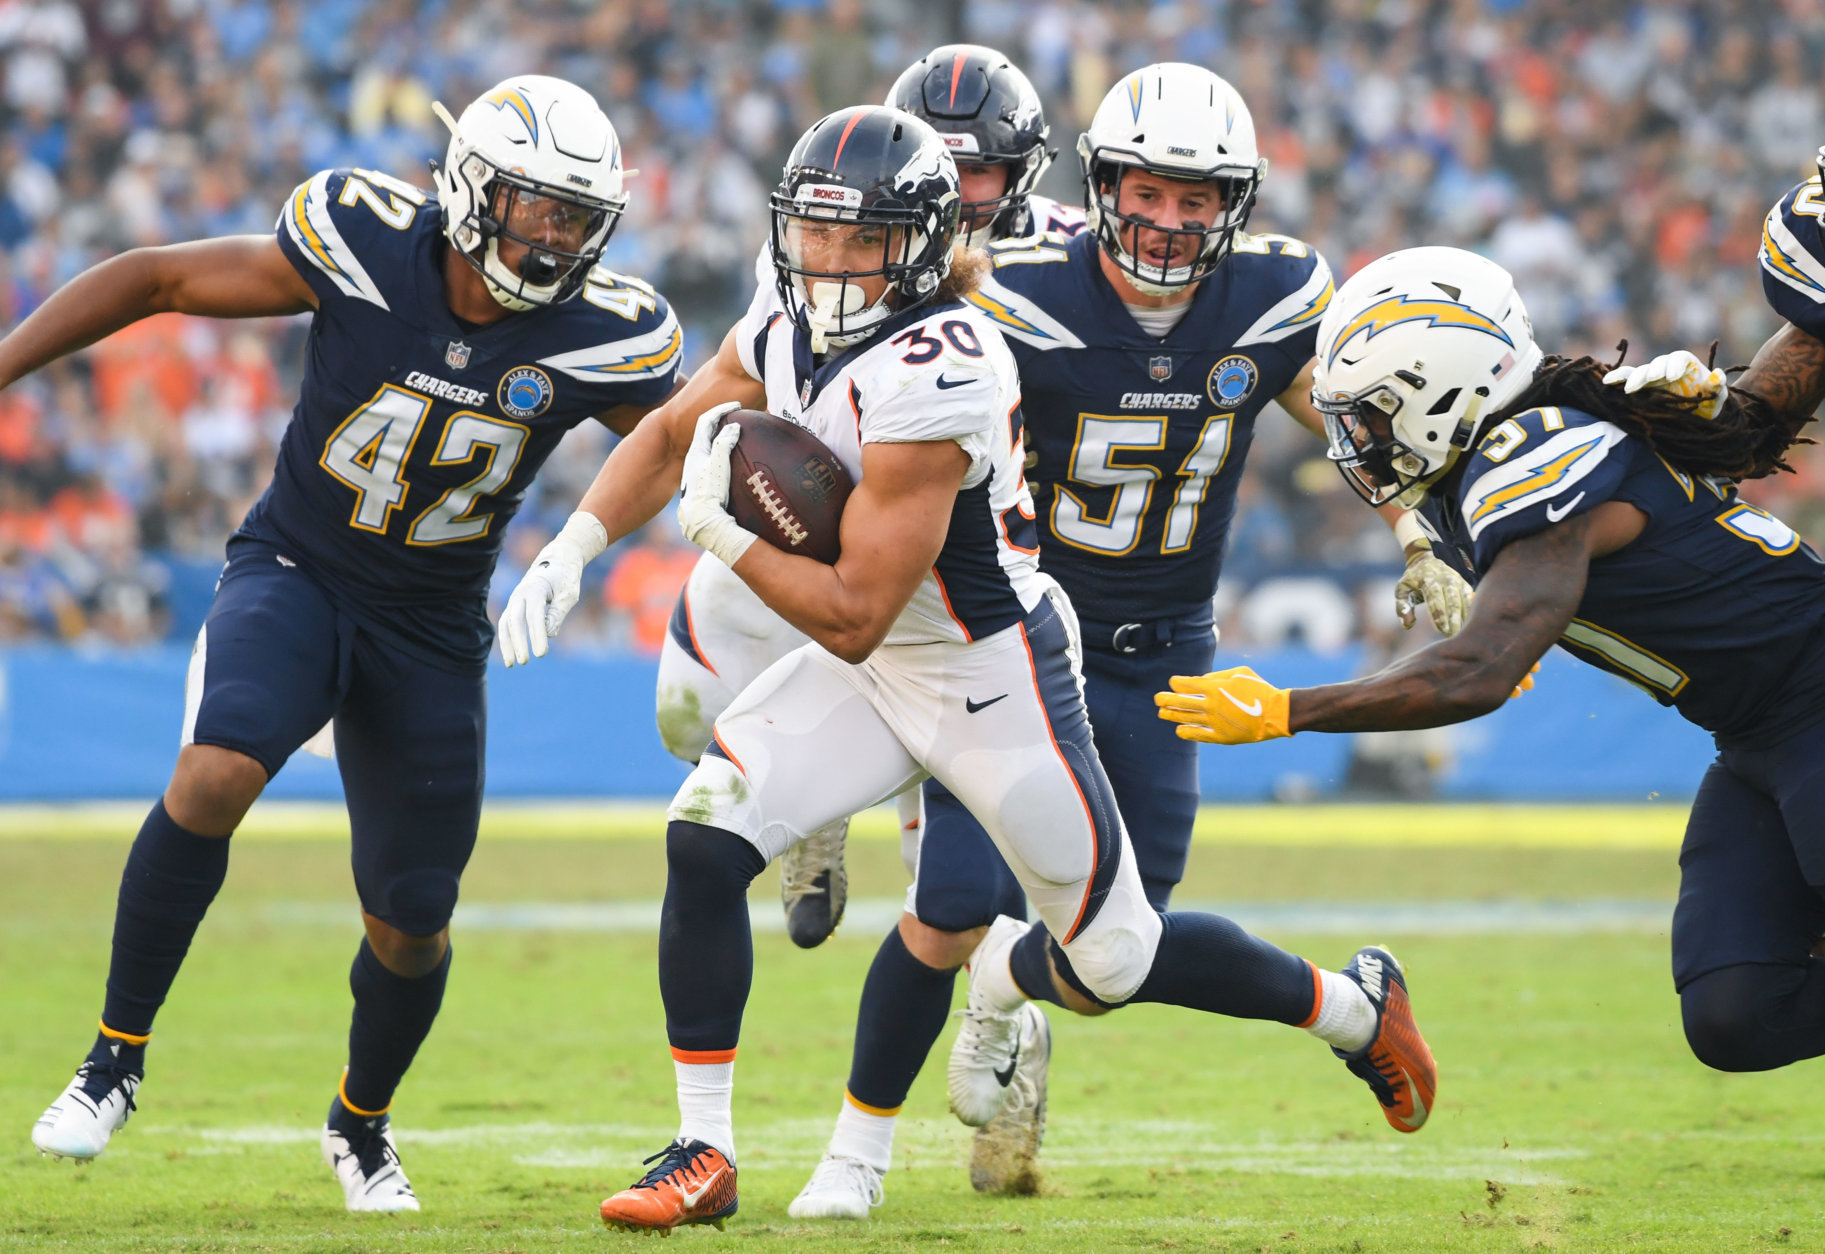 CARSON, CA - NOVEMBER 18: Running back Phillip Lindsay #30 of the Denver Broncos runs as he's chased by strong safety Jahleel Addae #37 of the Los Angeles Chargers in the third quarter at StubHub Center on November 18, 2018 in Carson, California. (Photo by Harry How/Getty Images)